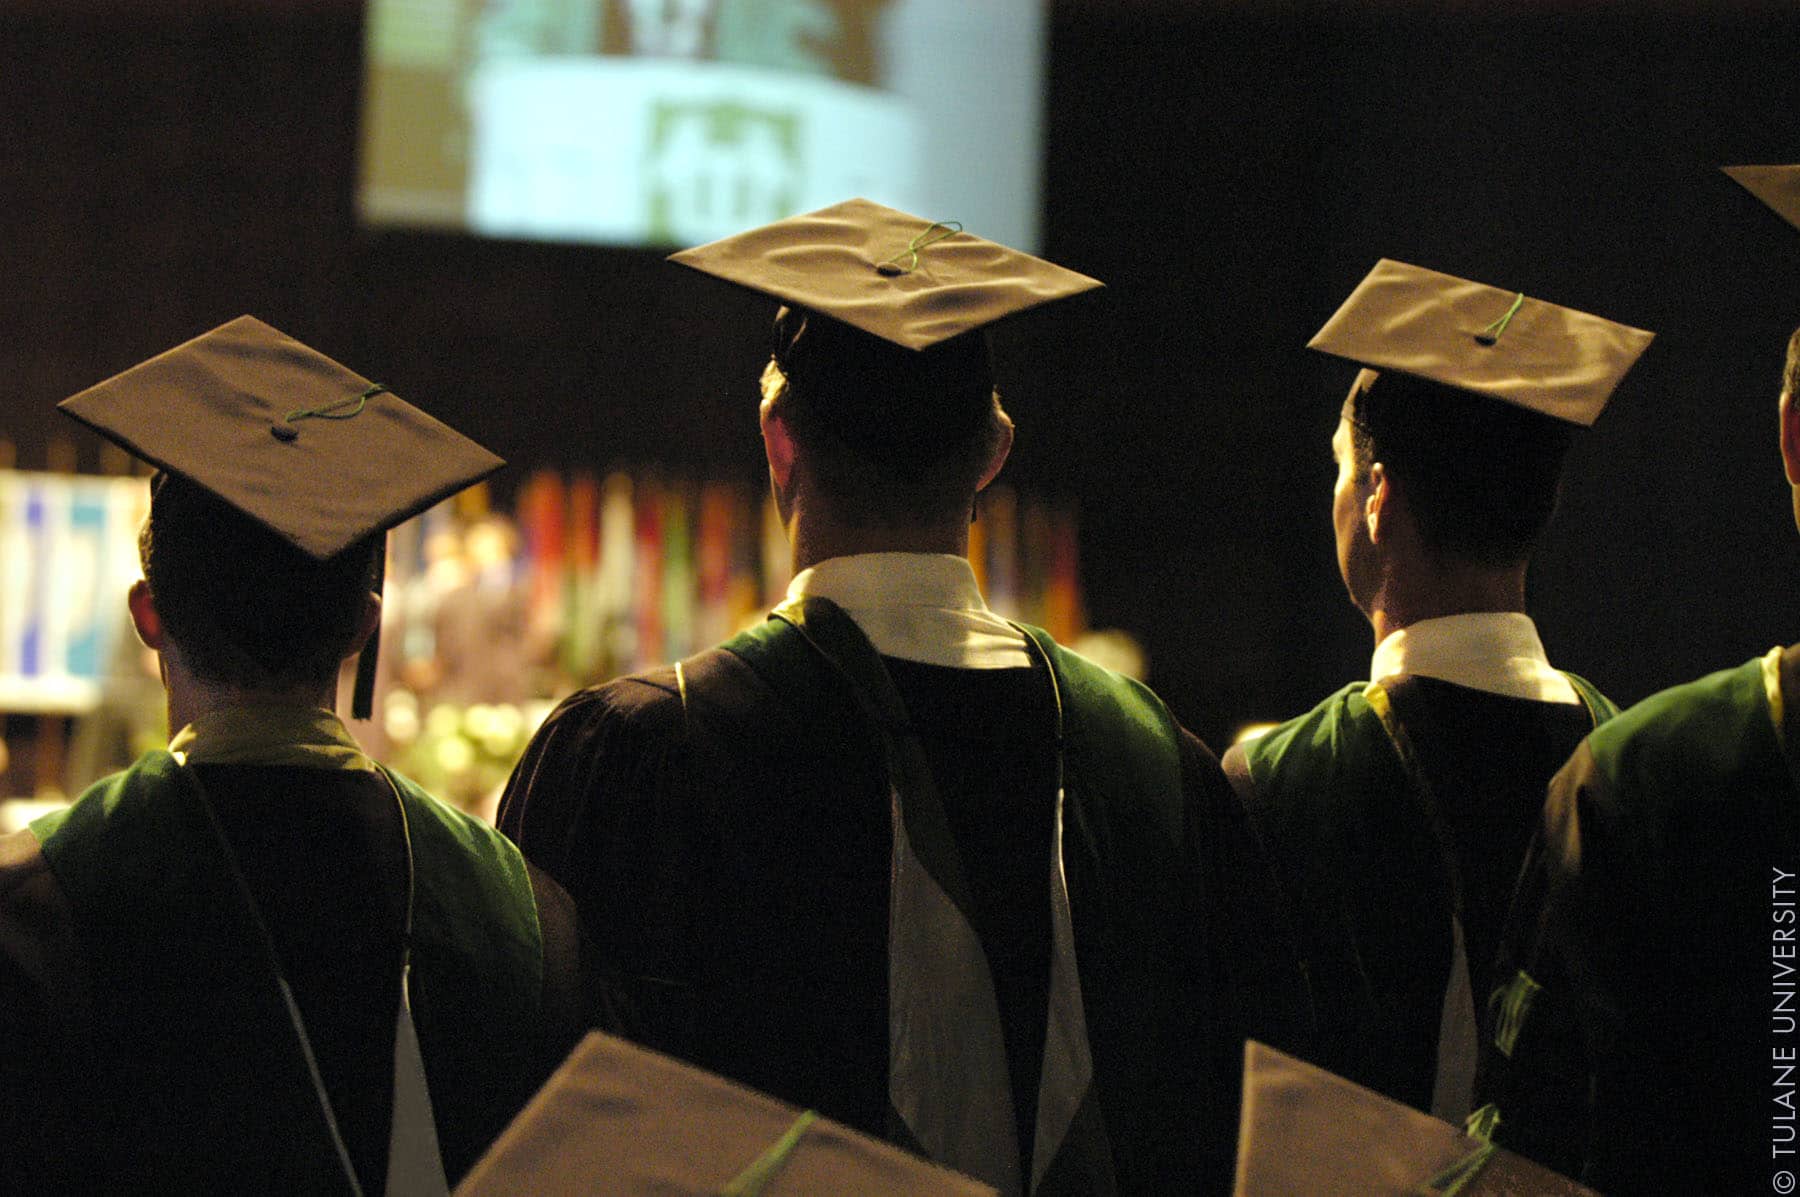 Tips For Finding Success In Life After Graduation